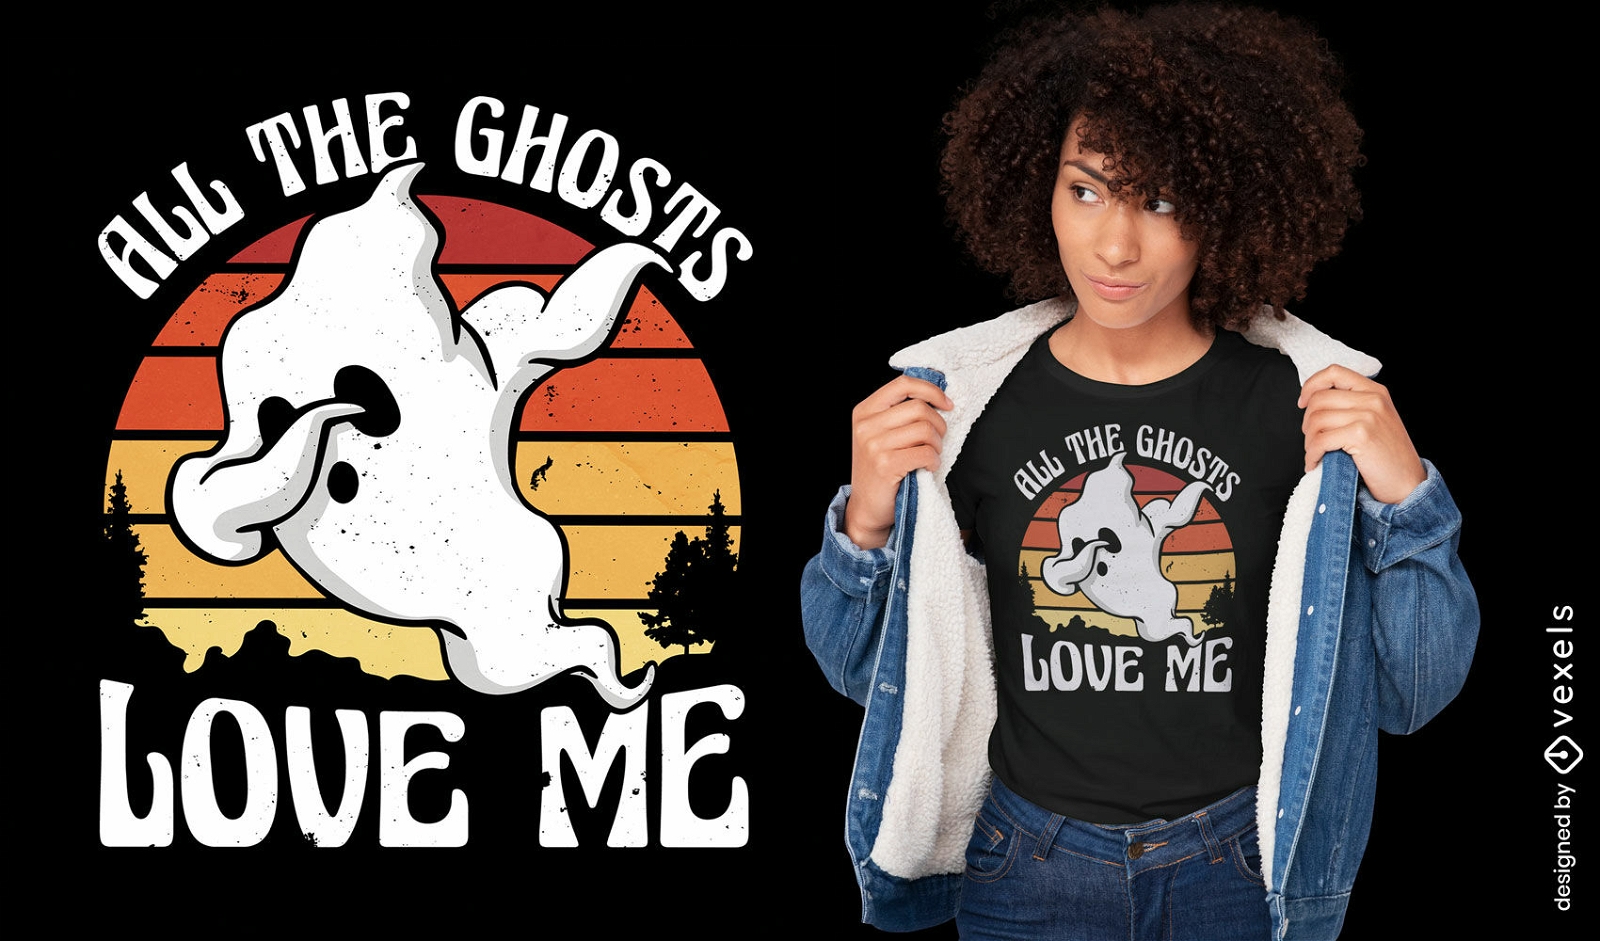 All ghosts love me t-shirt design